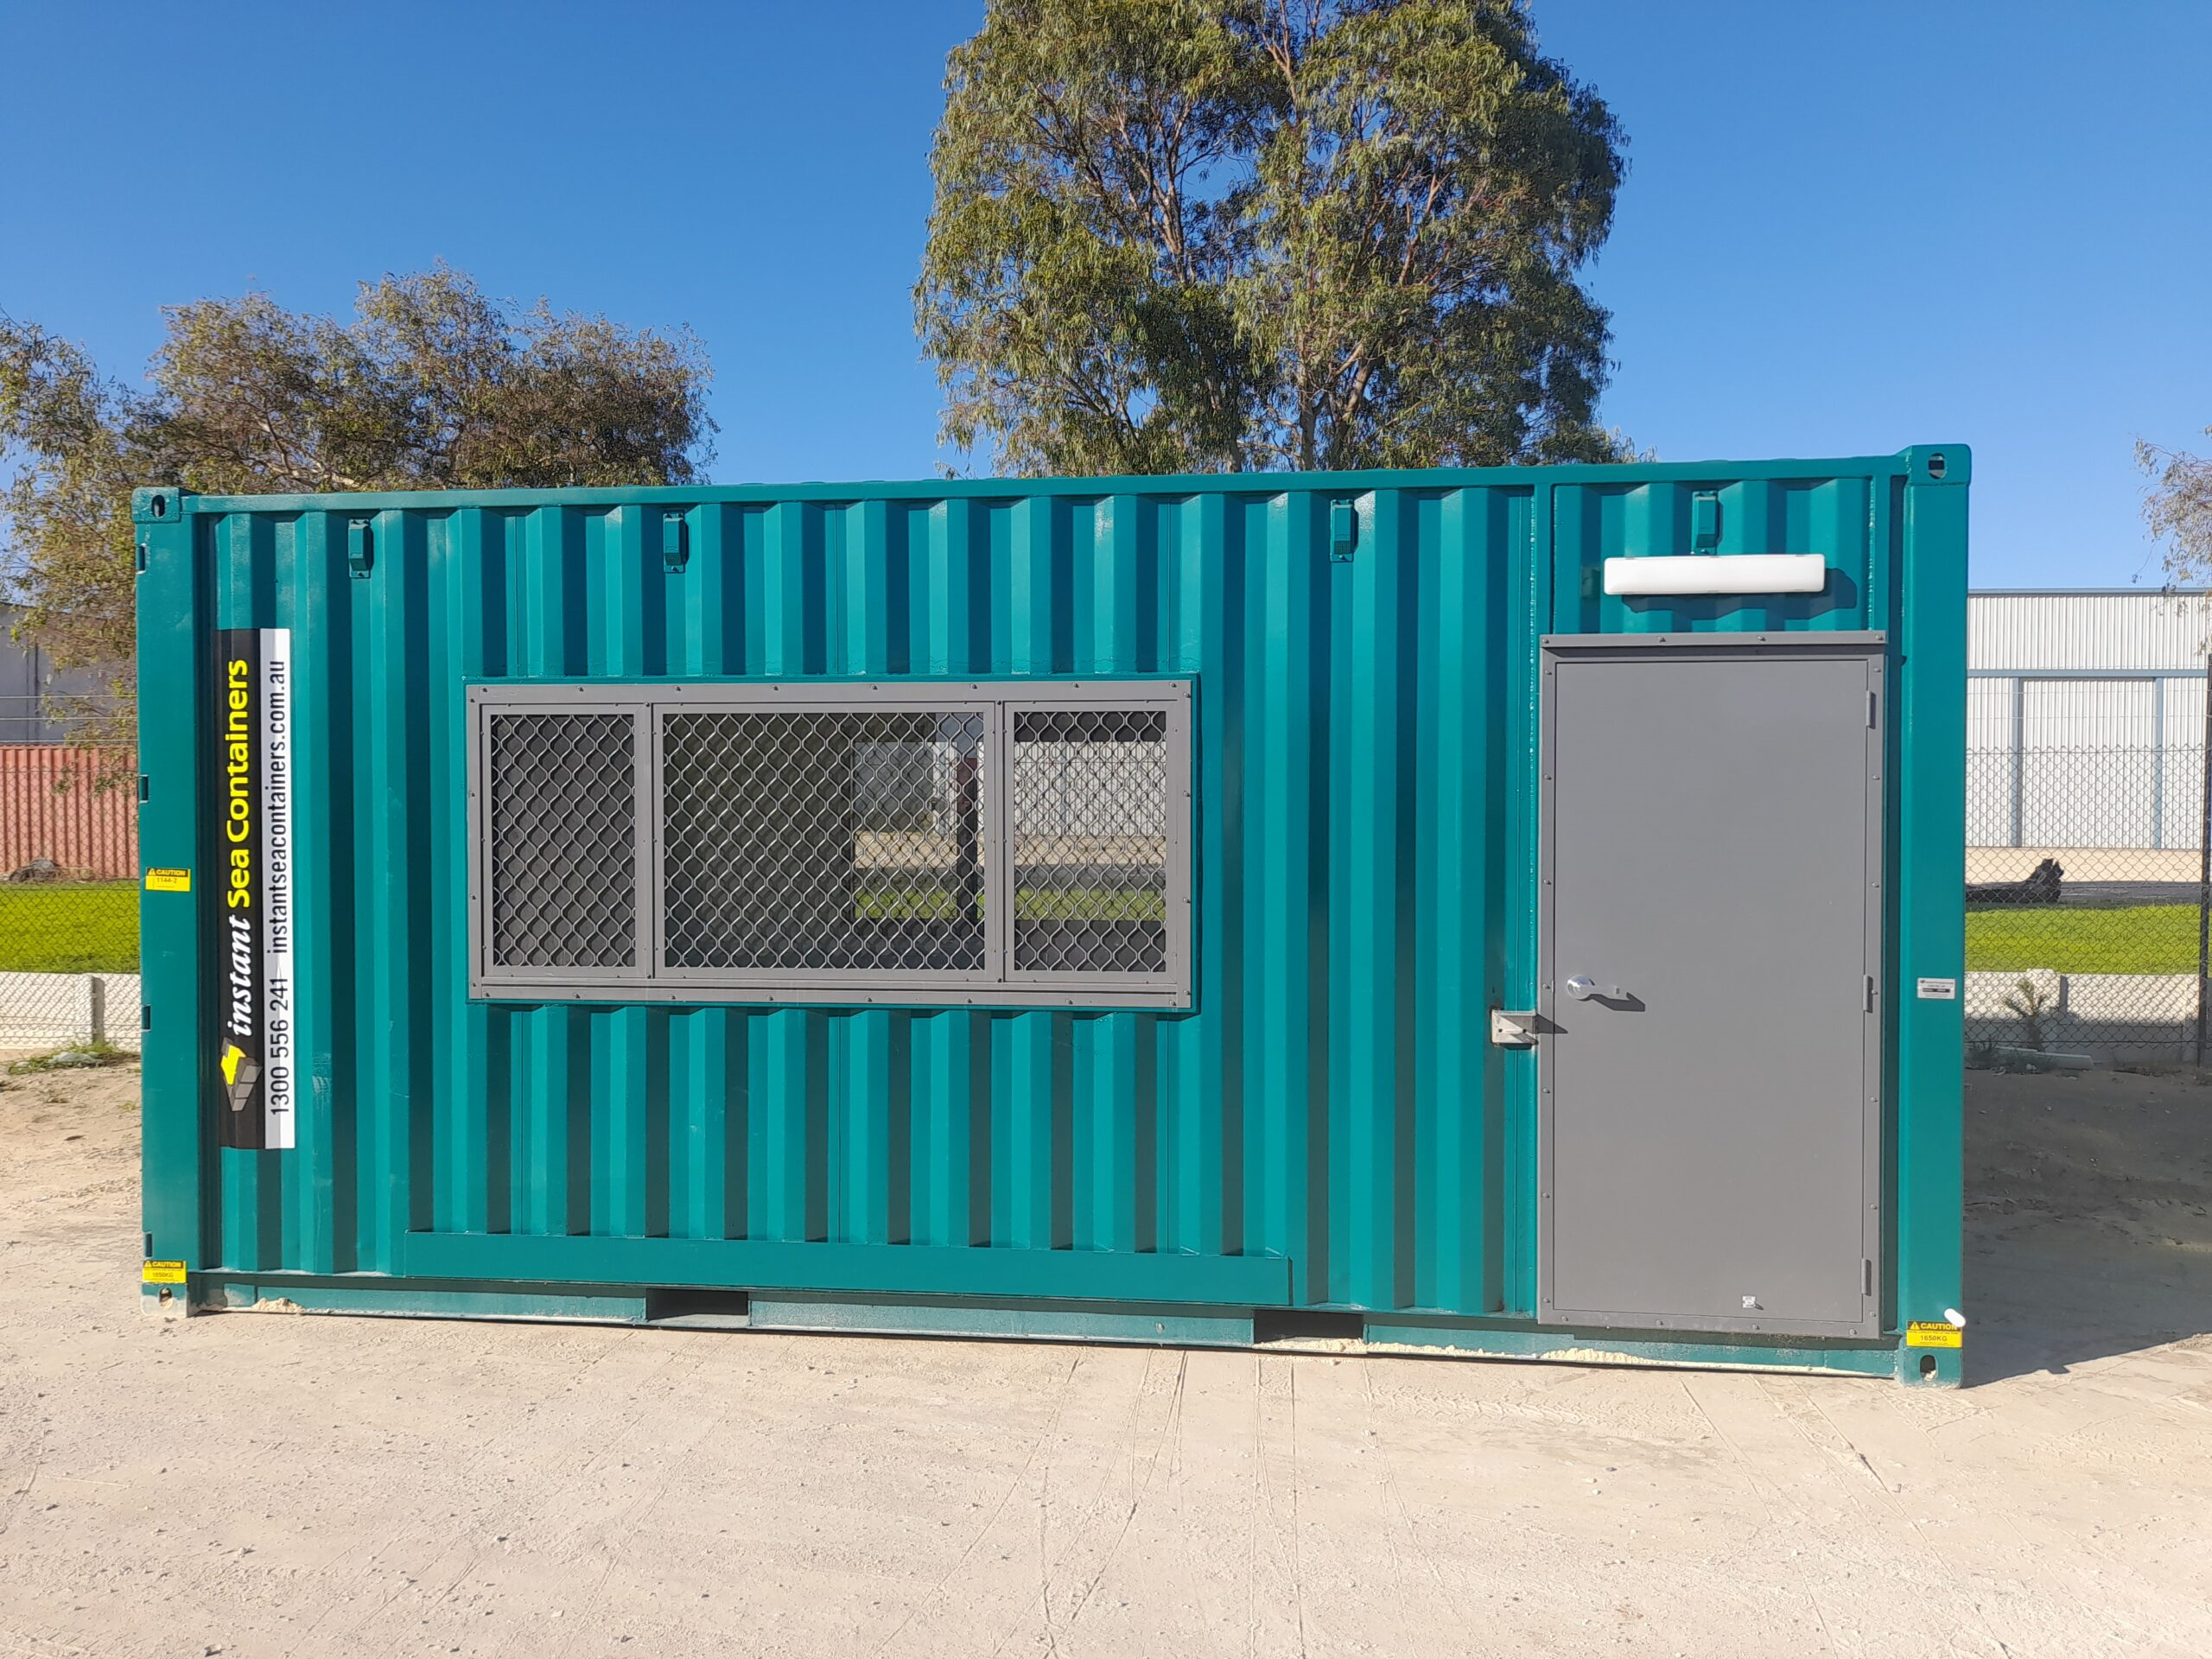 Shipping Container Event Office in a striking teal color, equipped with a large mesh window and a secure side door